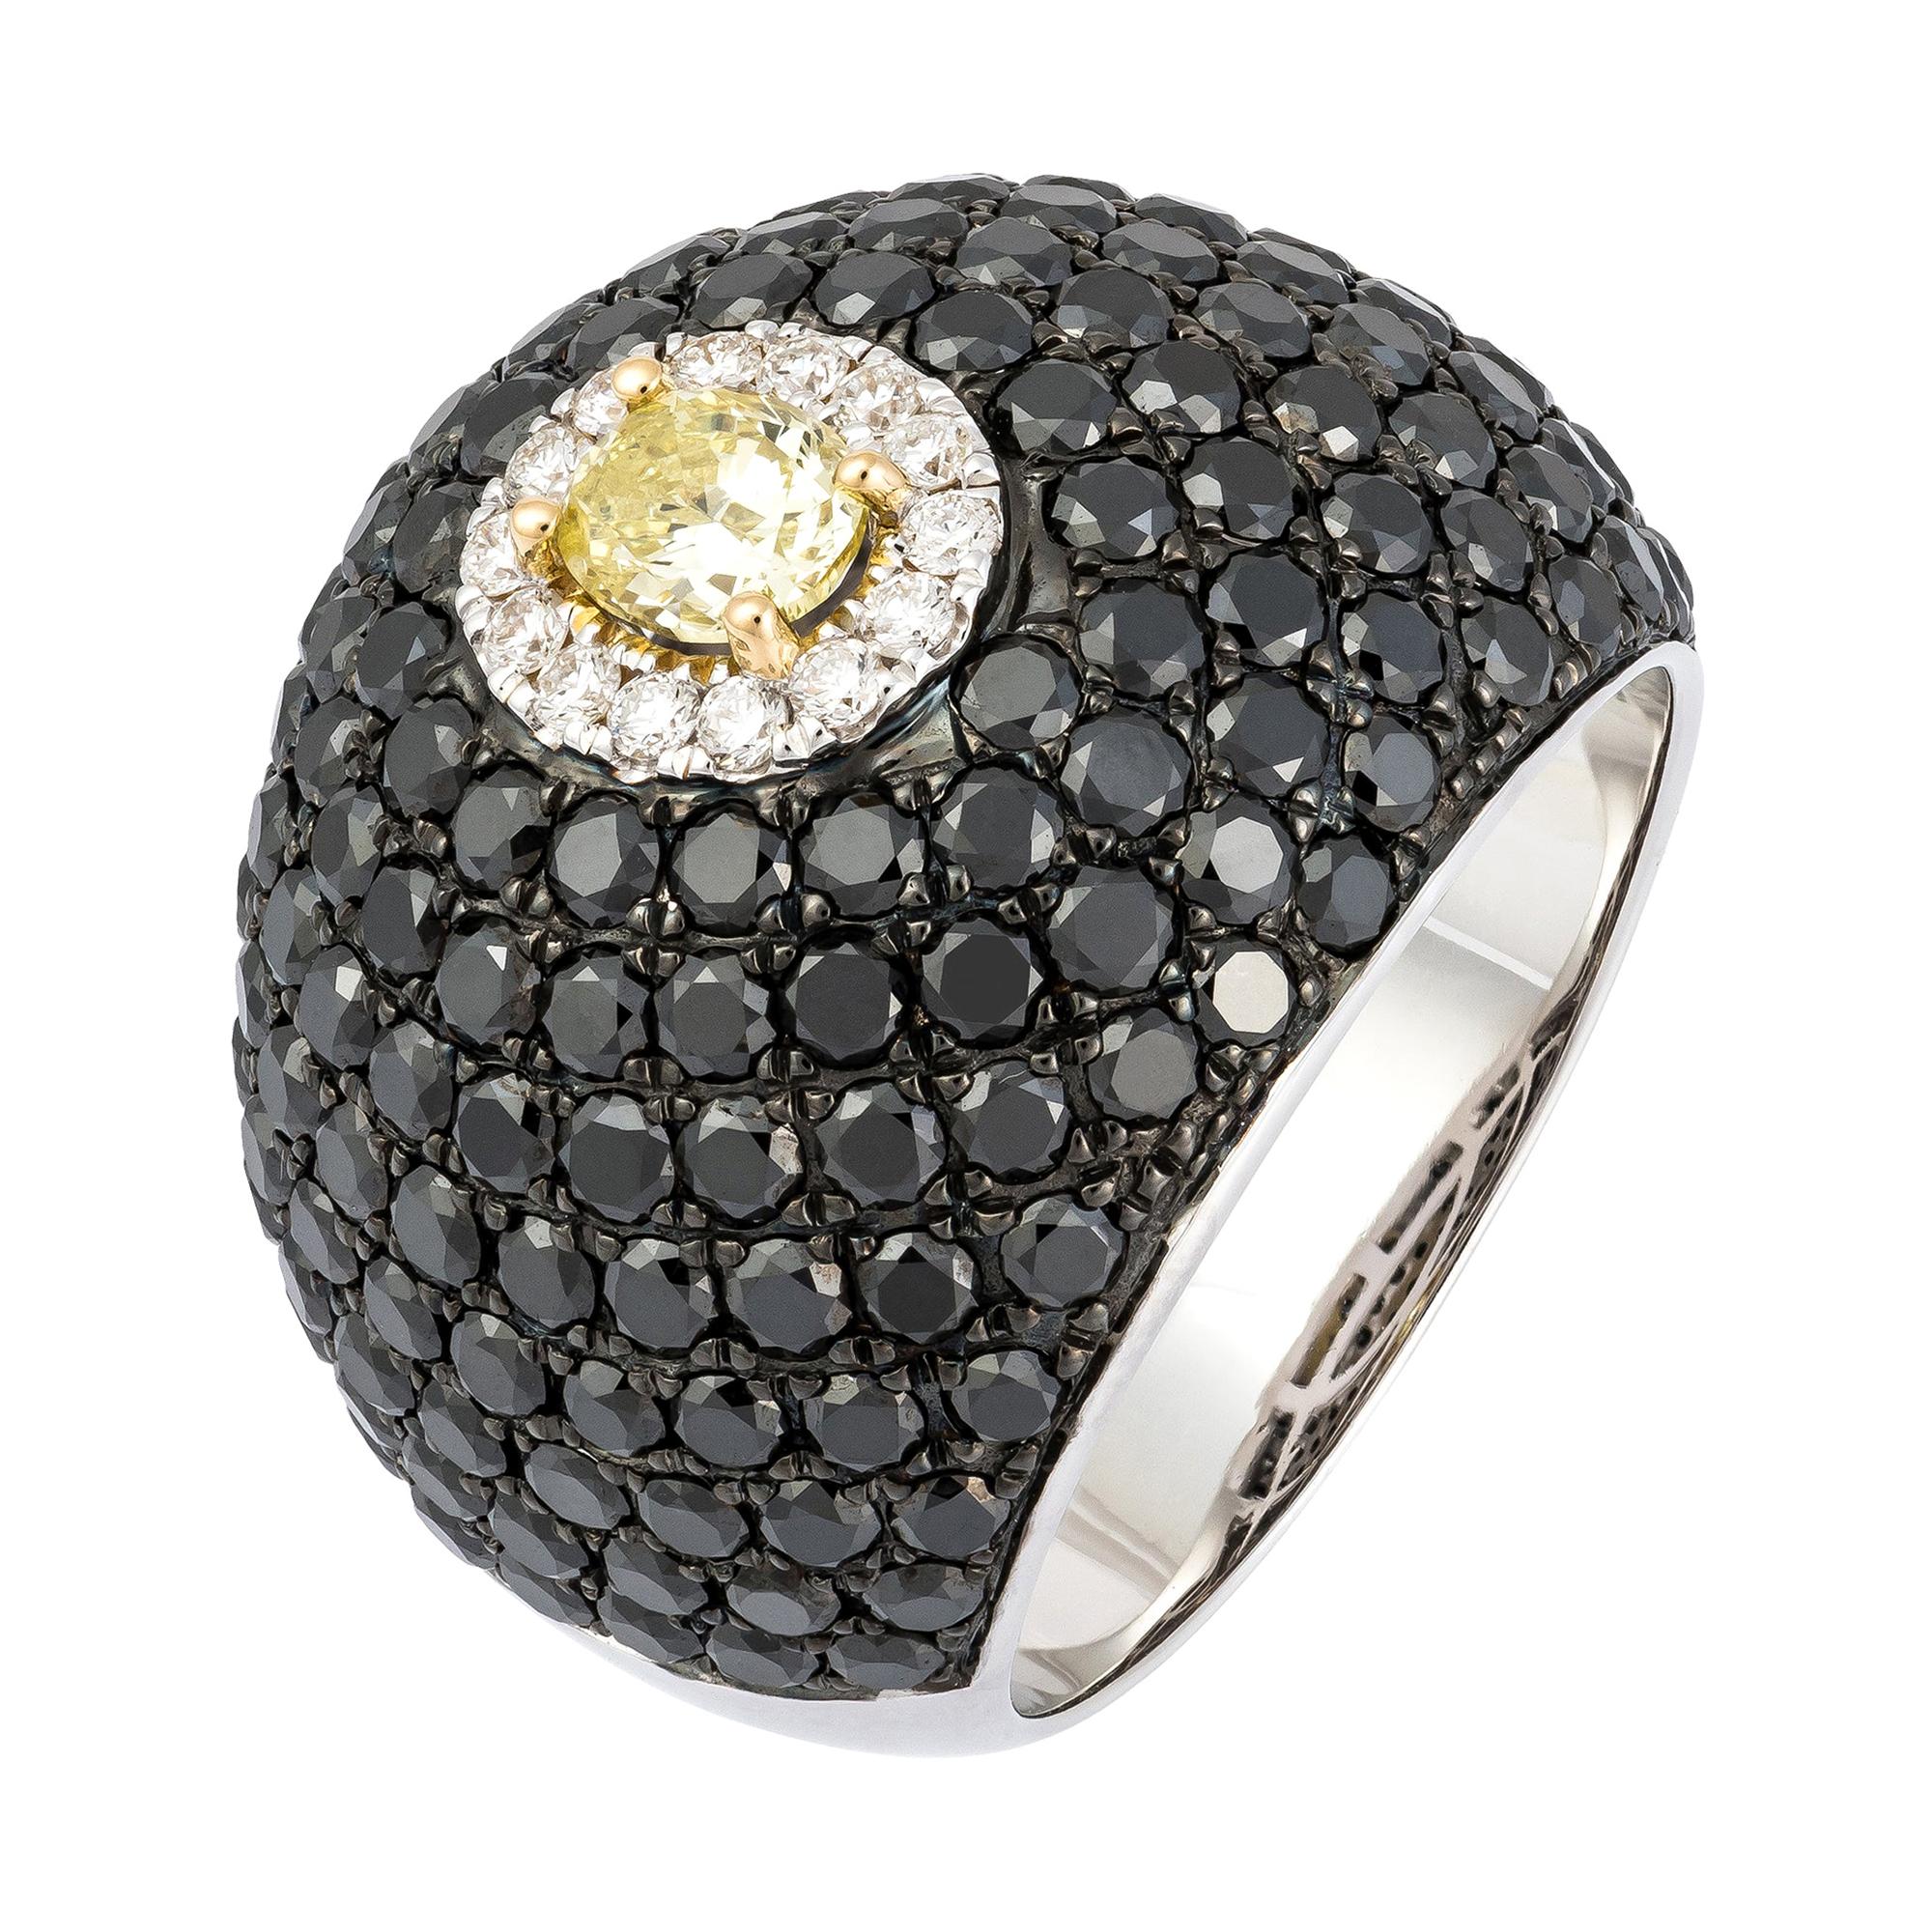 Rare Black Yellow Diamond White Gold 18K Dome Ring for Her For Sale